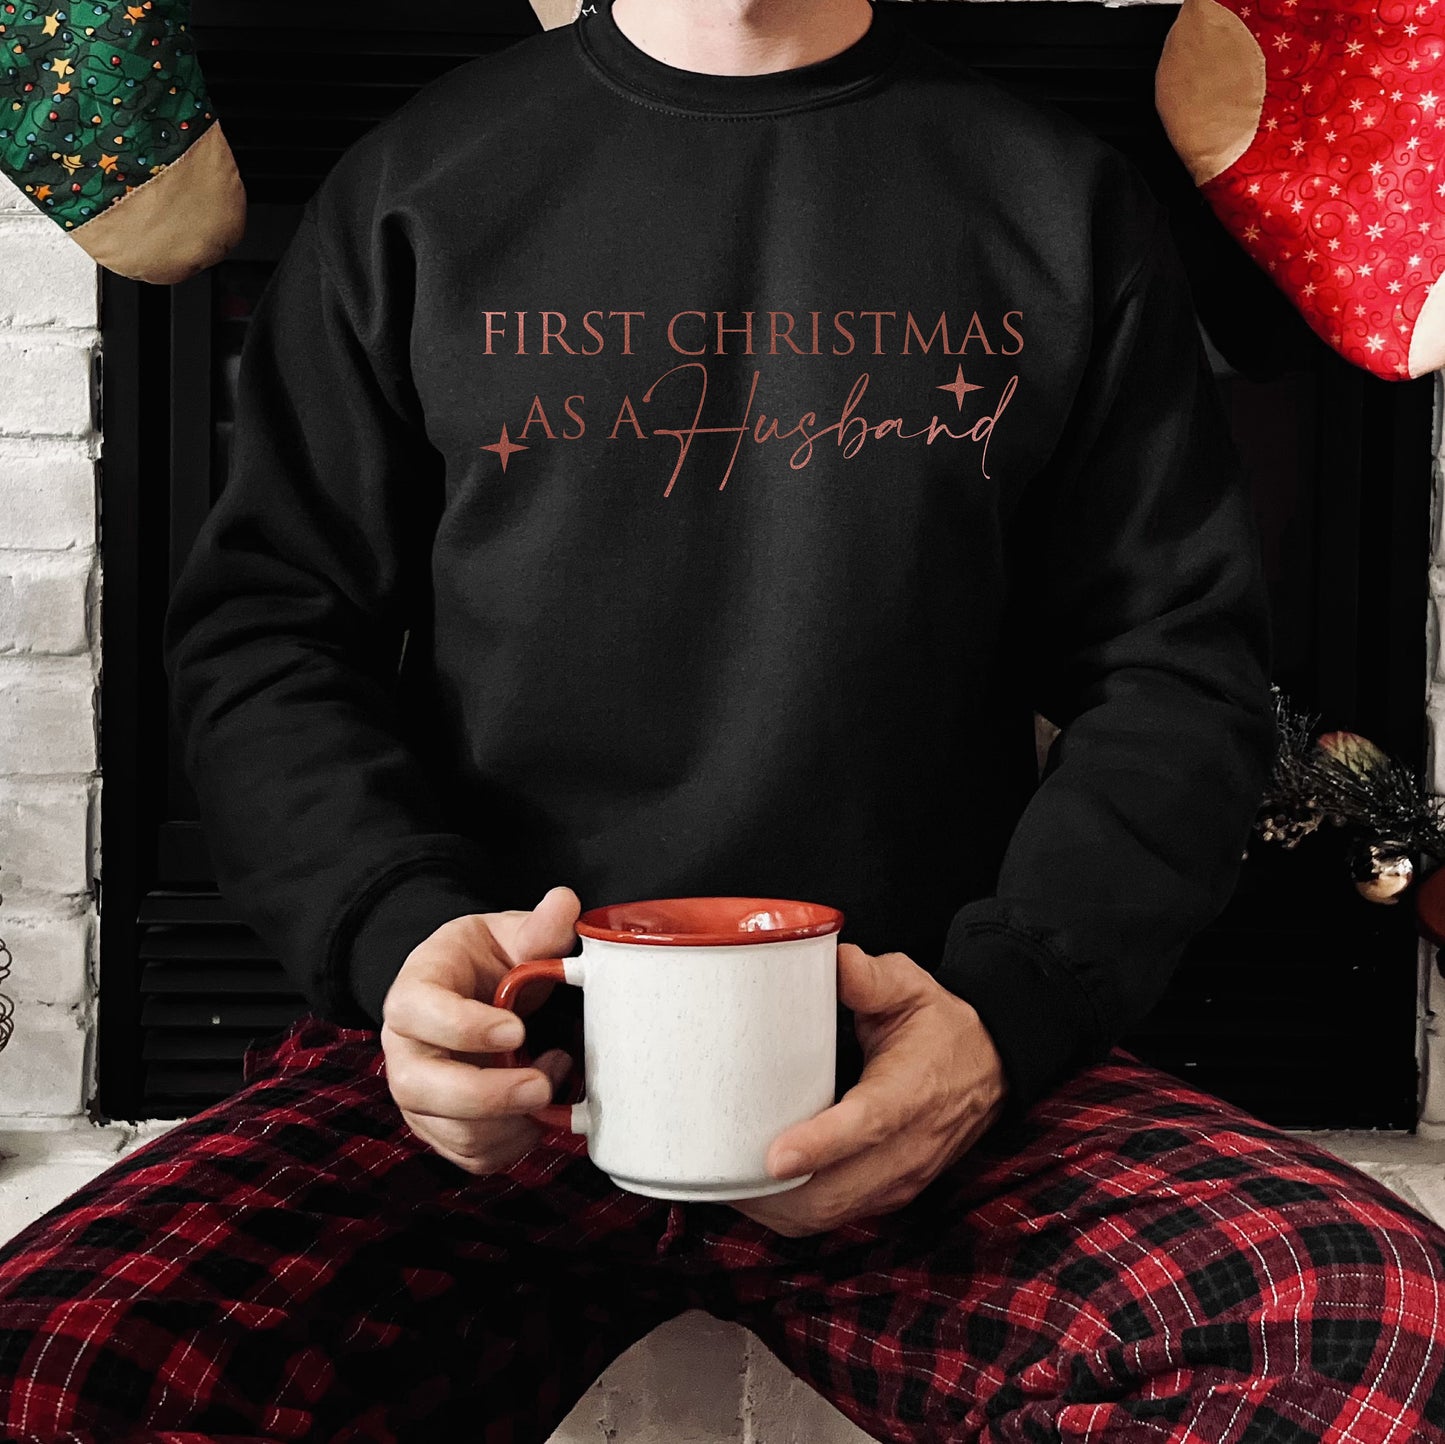 ROSE GOLD PRINT First Christmas As A Husband Sweatshirt B | Christmas Jumper for Hubby | Jumper for Newlywed | Christmas Sweater for Groom